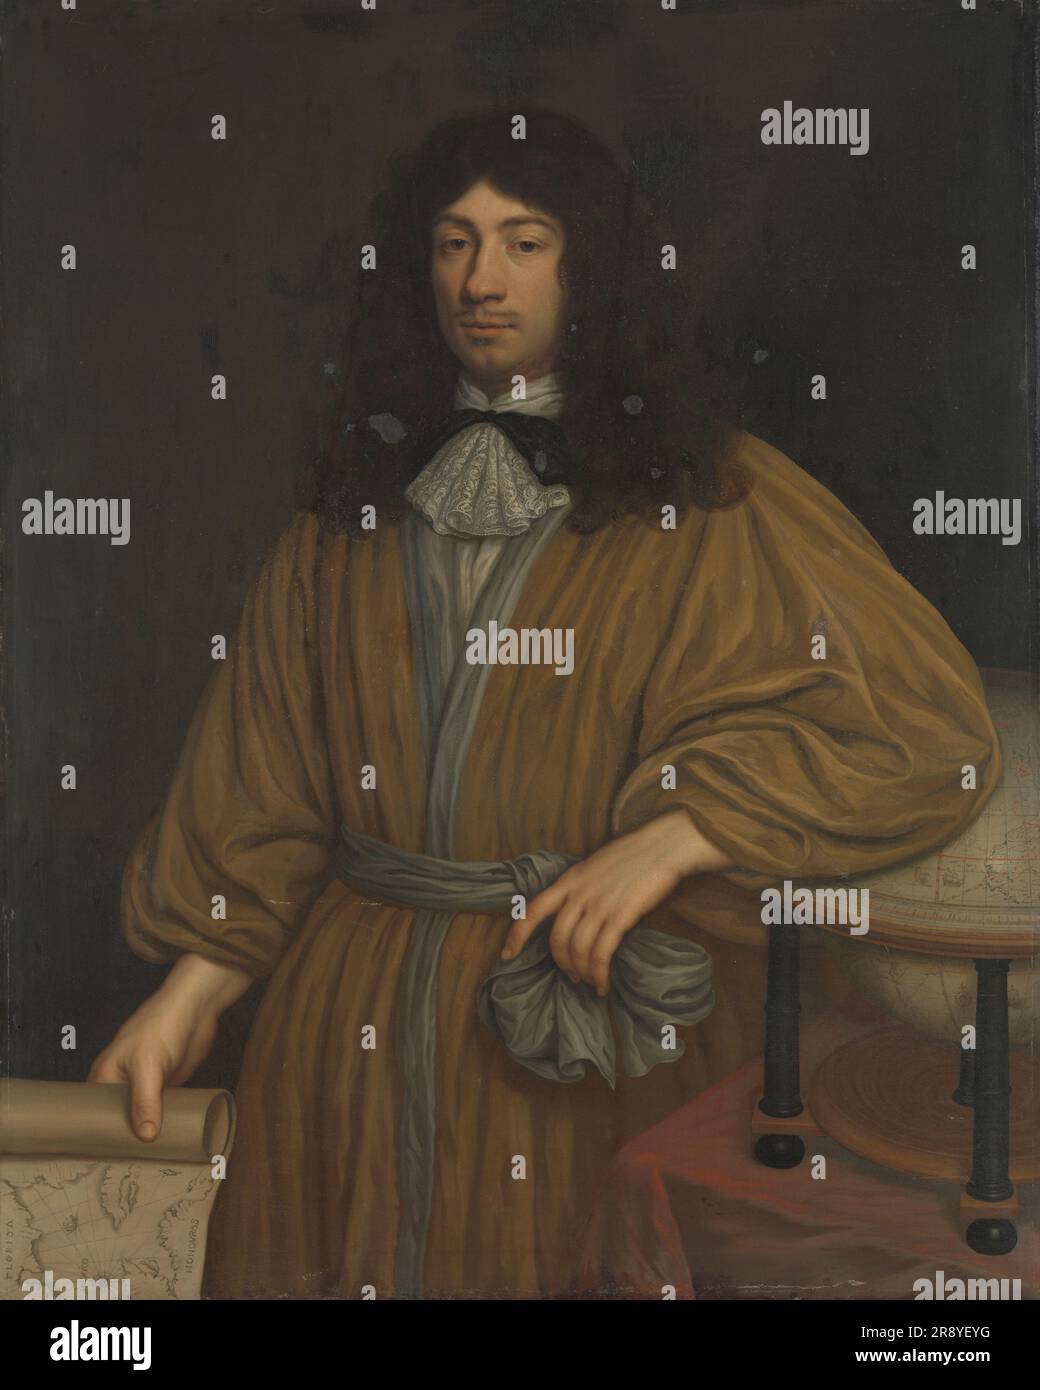 Johan Boudaen Courten (1635-1716), Lord of St Laurens, Schellach and Popkensburg. Councillor of Middelburg and Director of the East India Company, 1668. Stock Photo